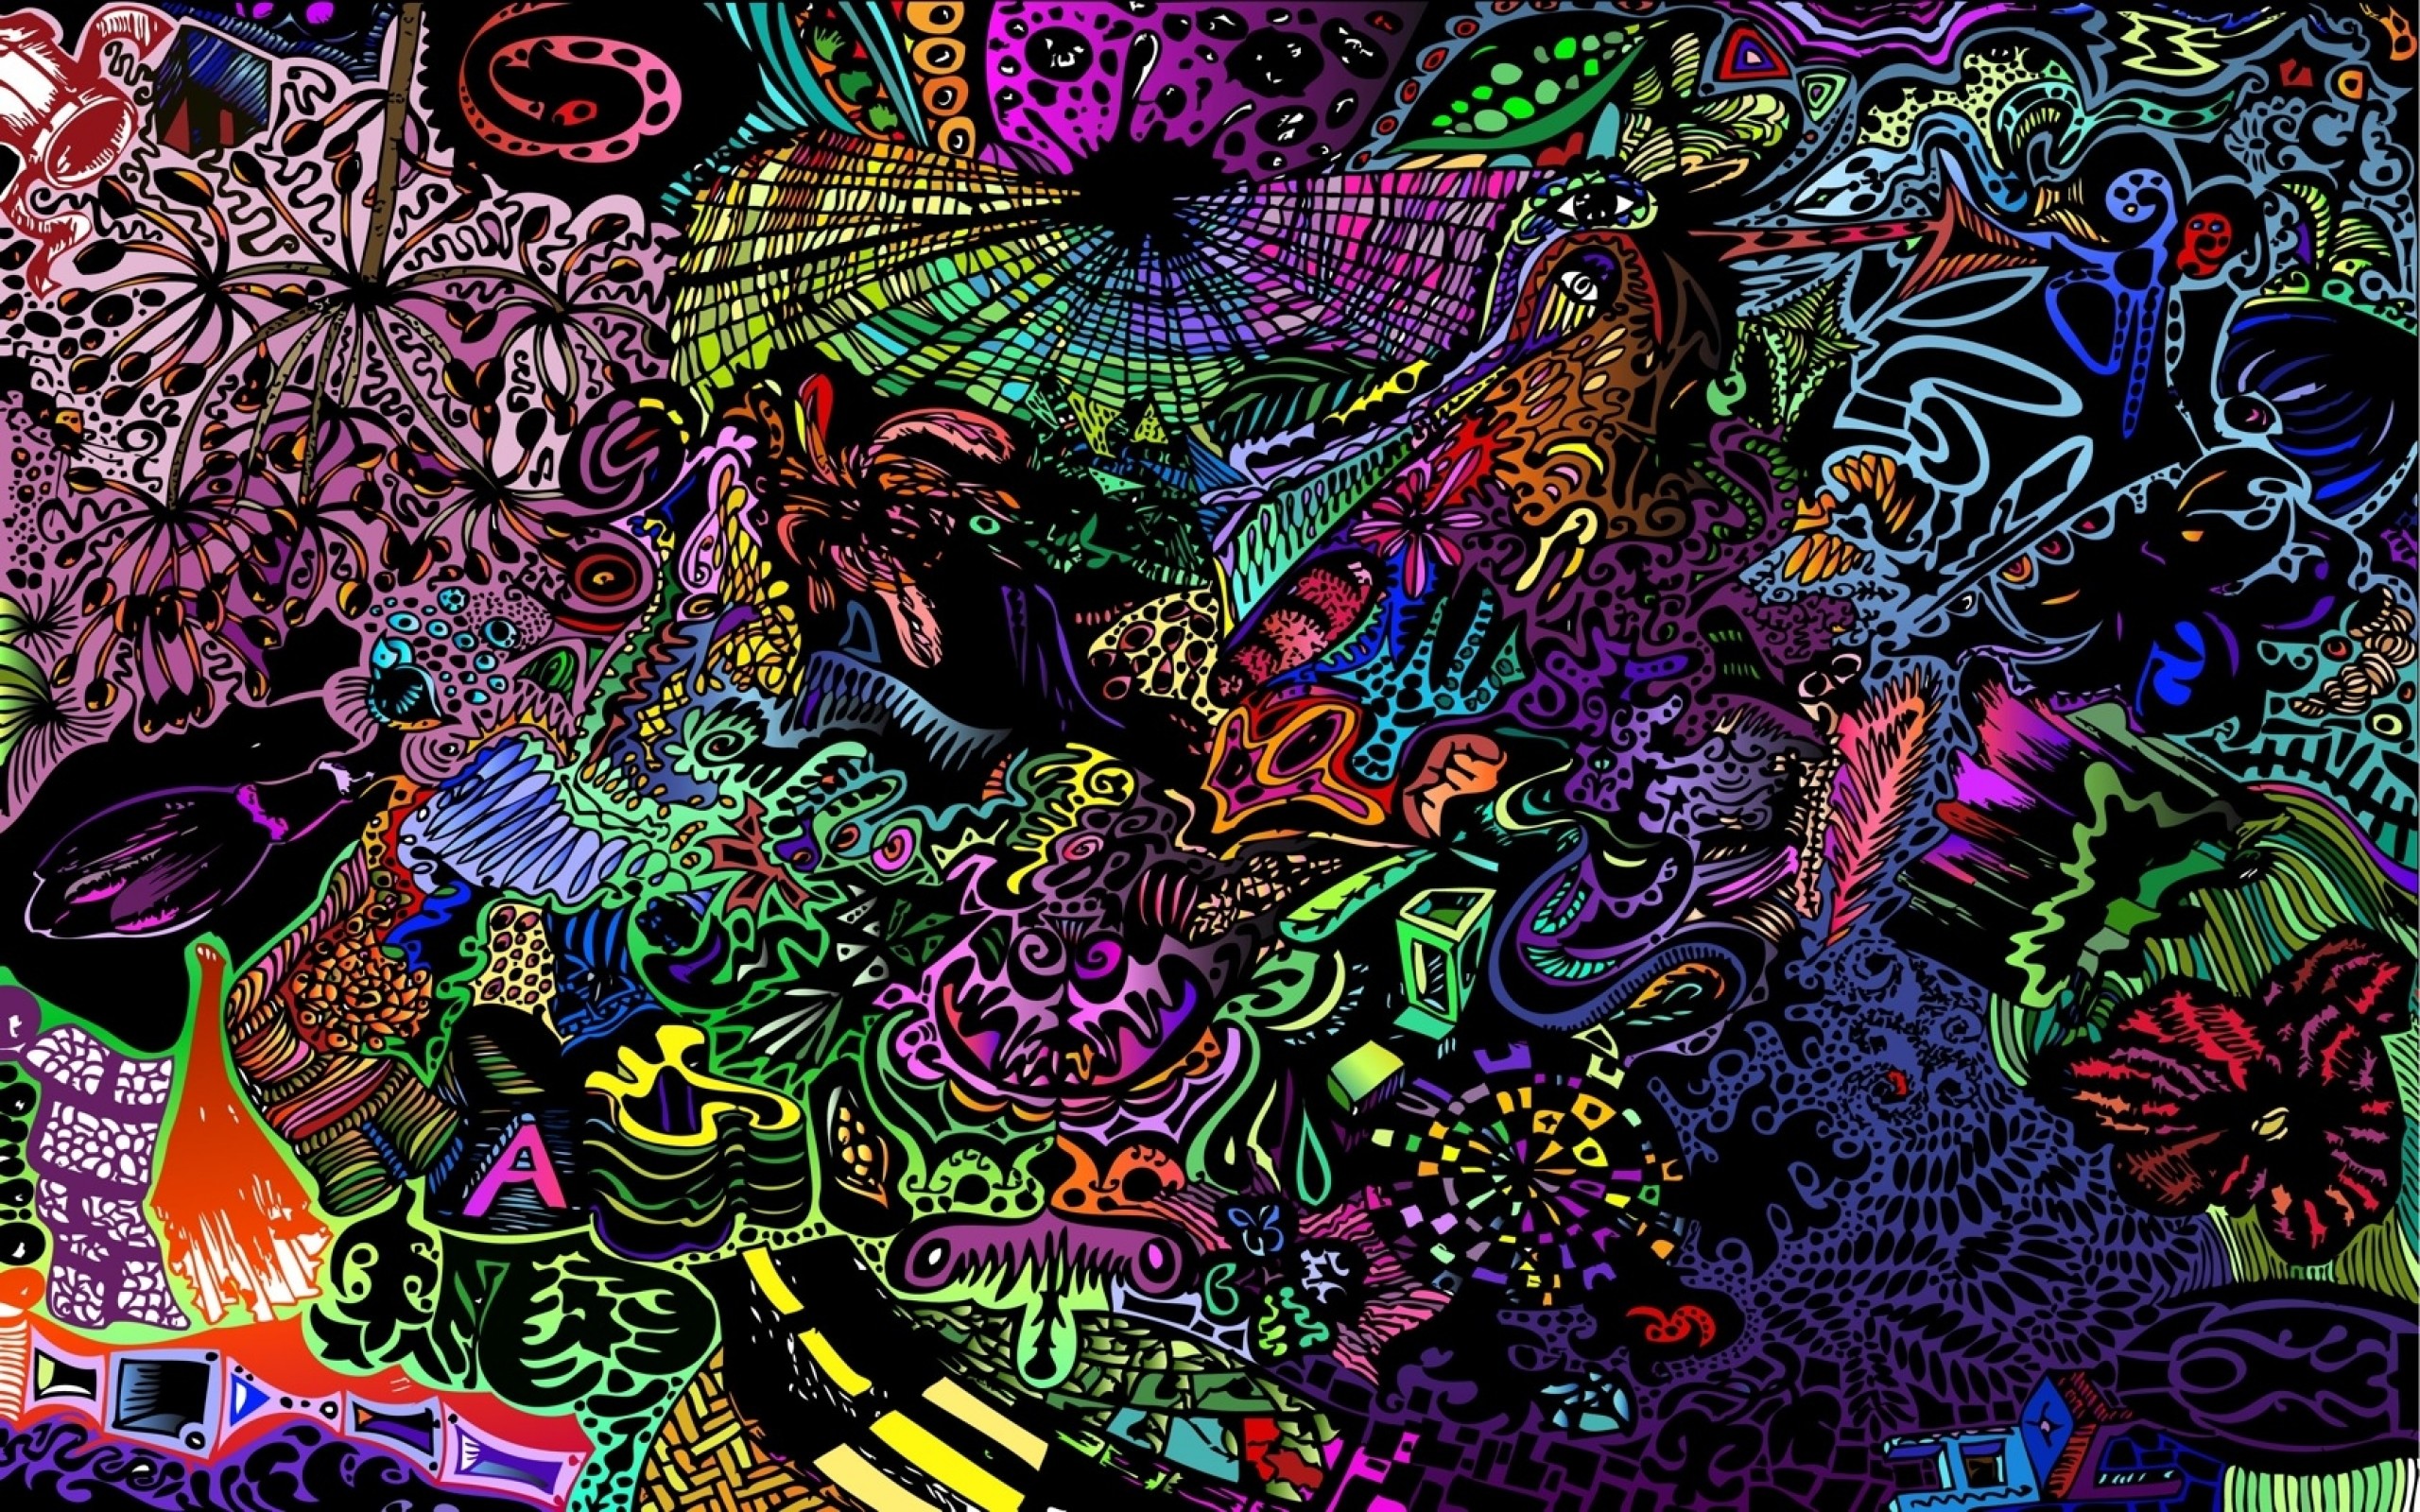 treanding trippy wallpaper HD. Psychedelic backgrounds For Iphone